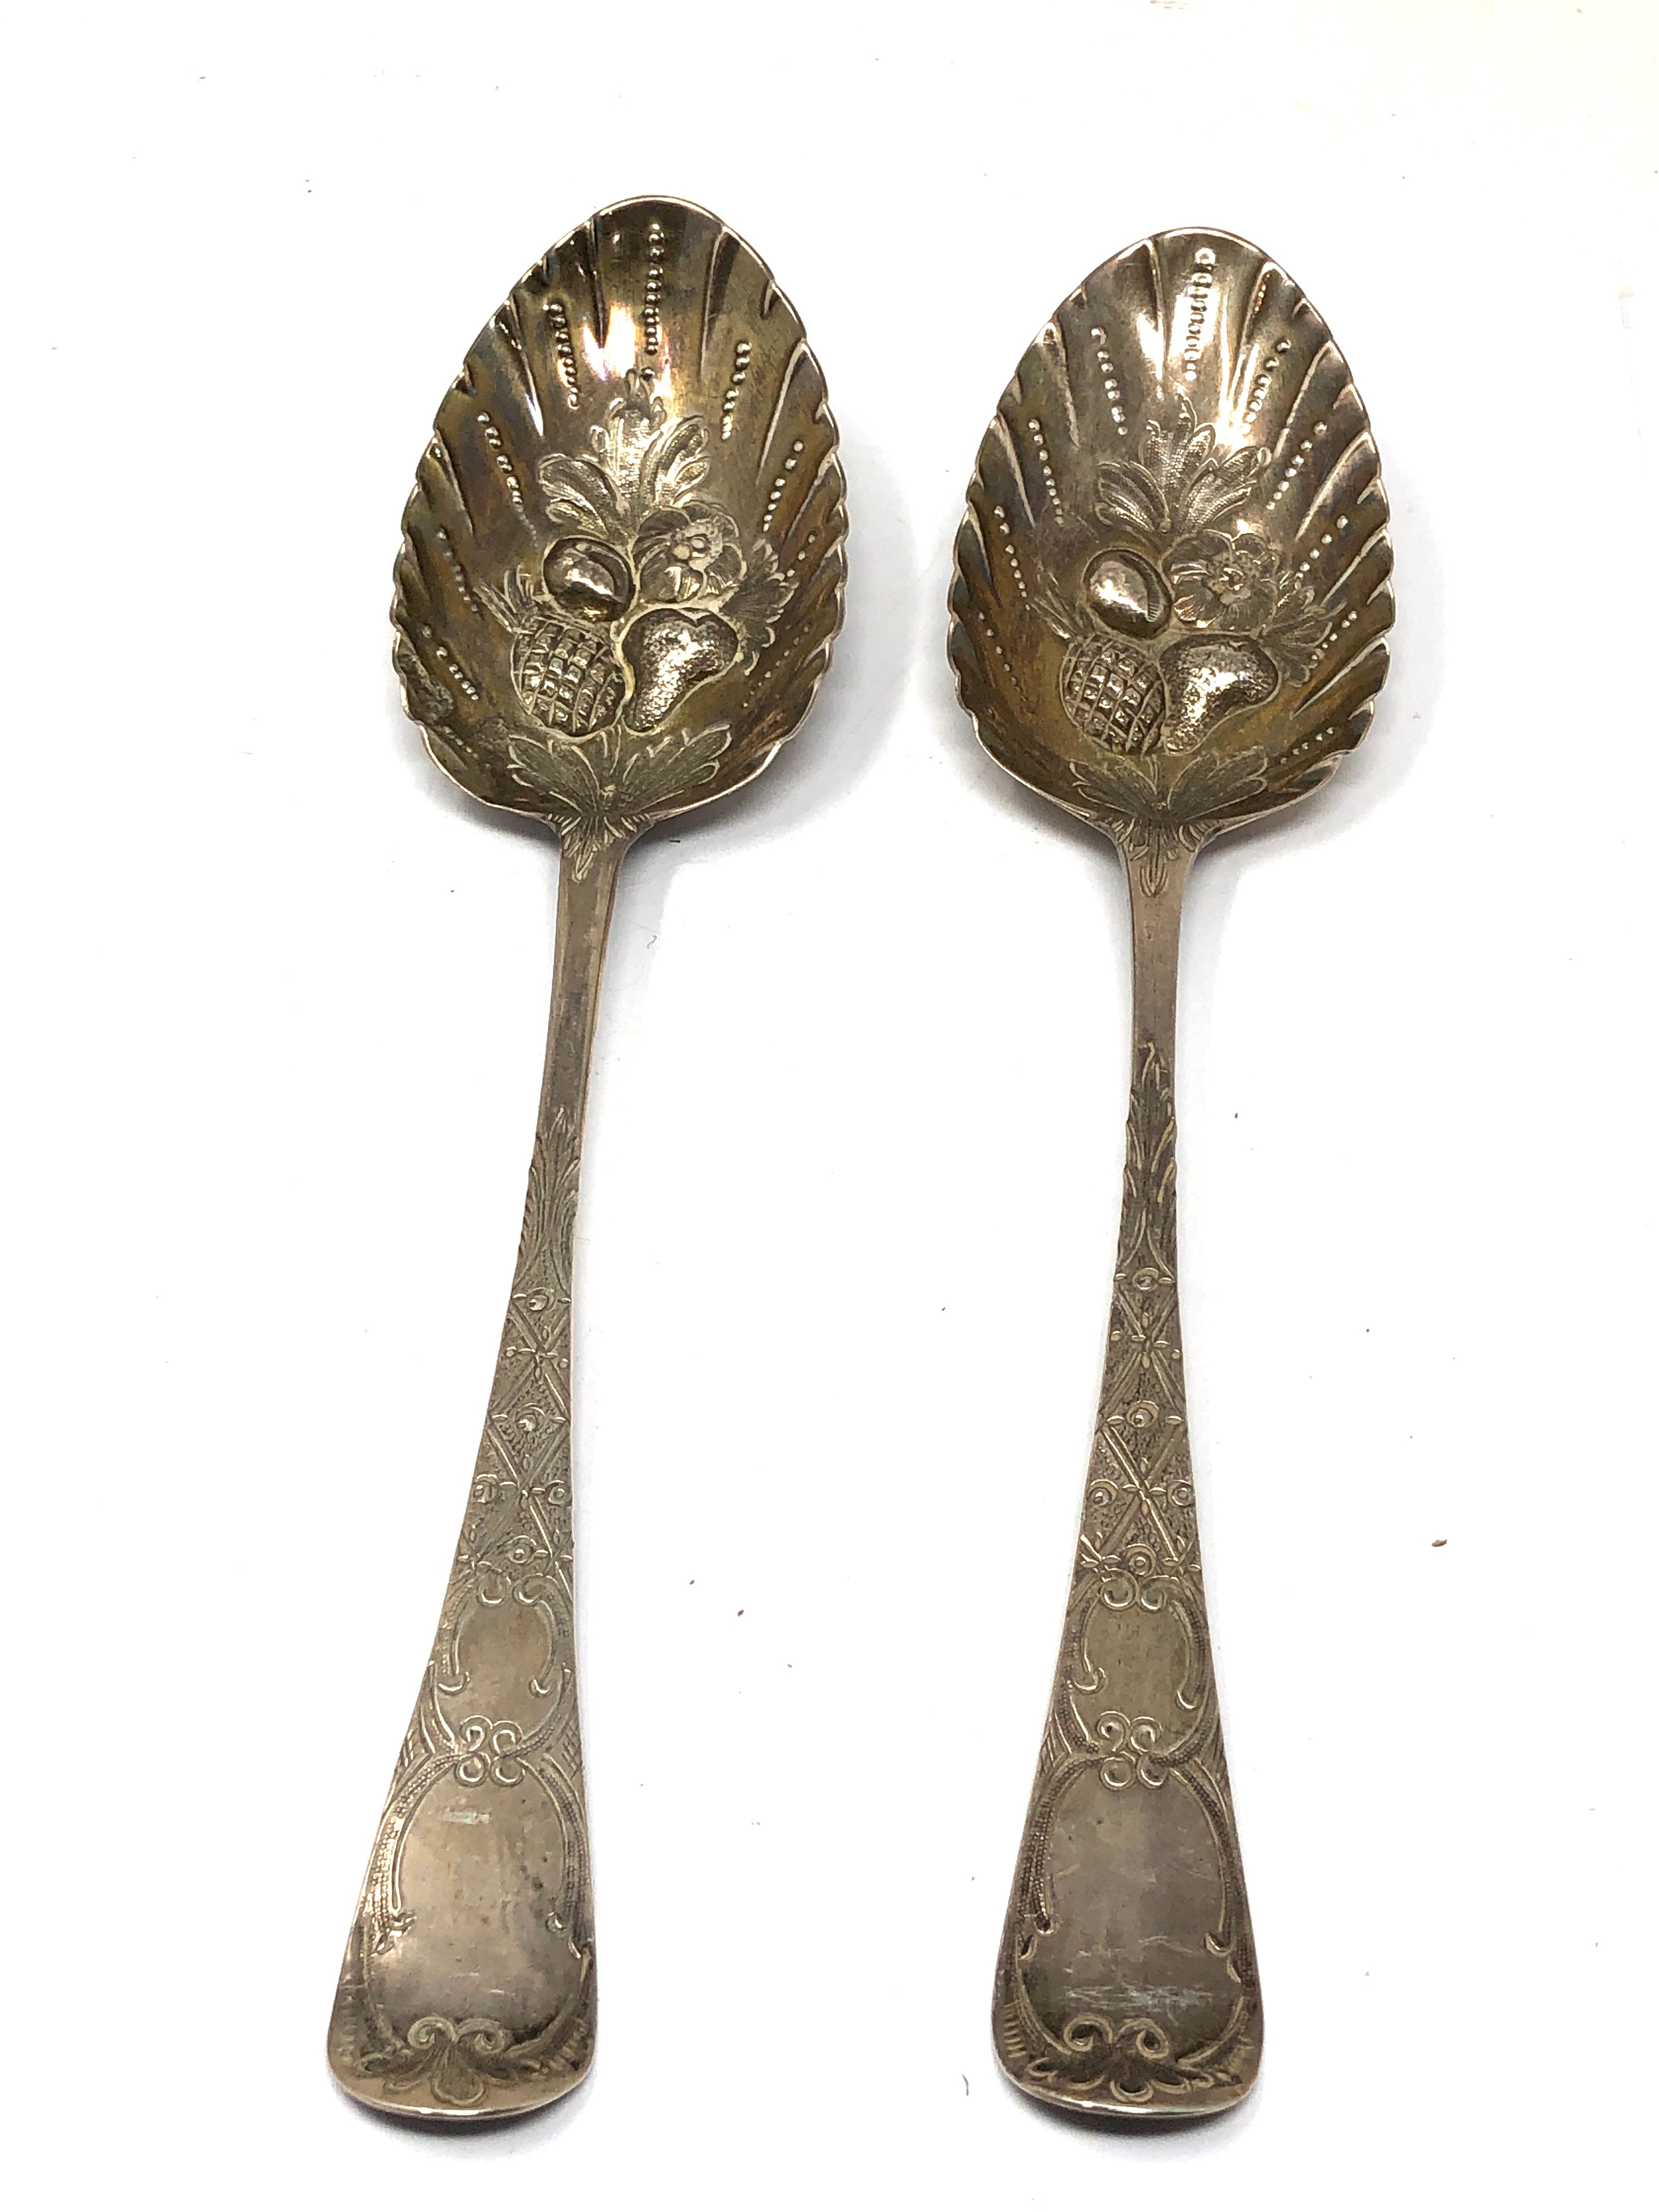 Pair of georgian silver berry serving spoons London silver hallmarks weight 104g - Image 2 of 4